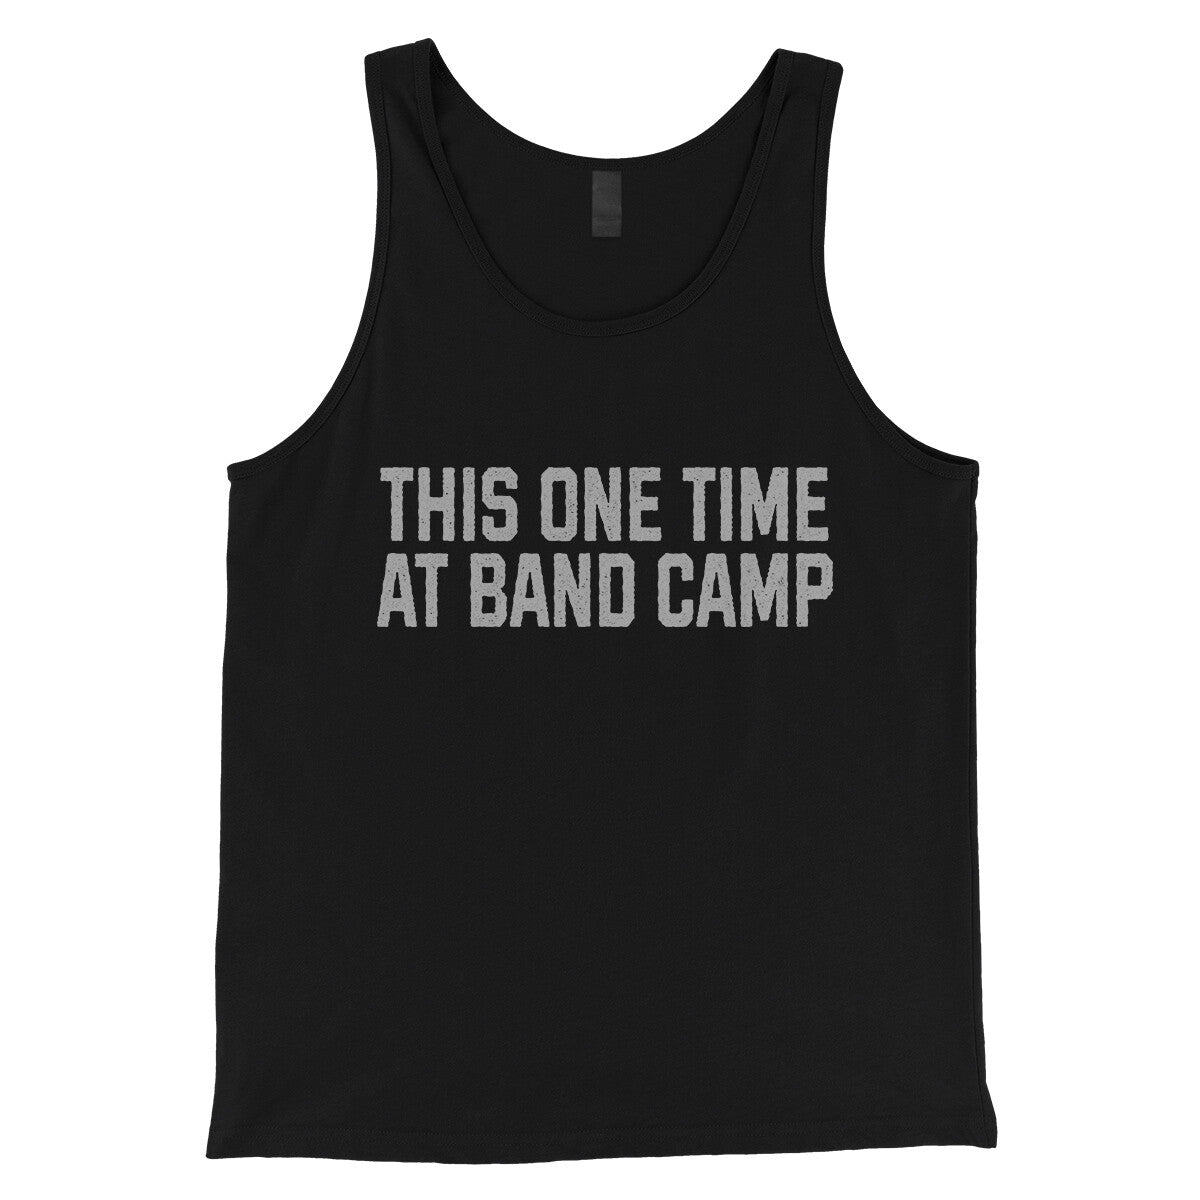 This One Time at Band Camp in Black Color